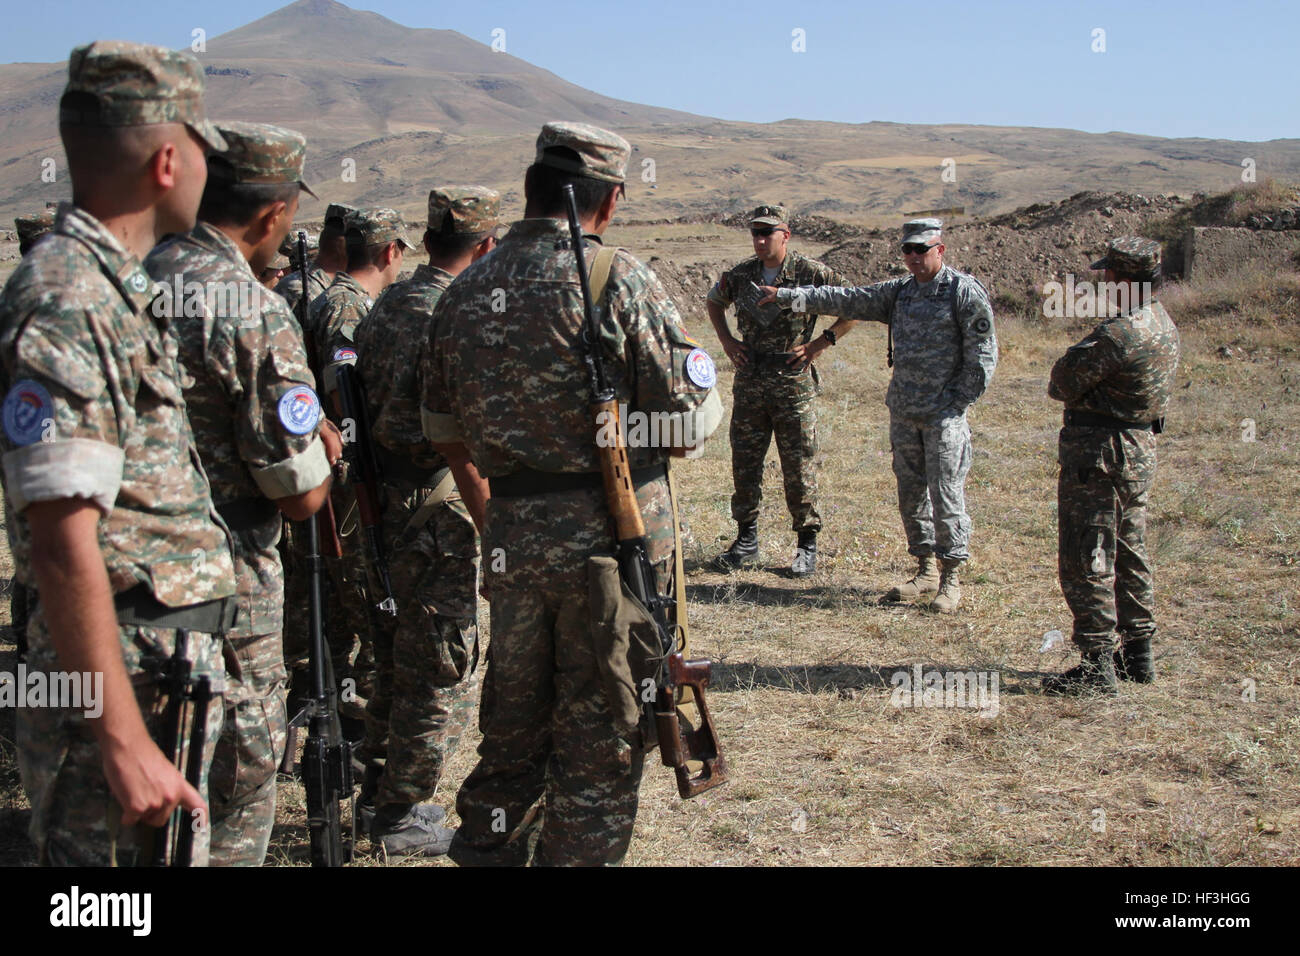 A small group of Kansas National Guardsmen assist and advise Soldiers with the Armenian Peacekeeping Brigade at the Zar Mountain Training Center, near Yerevan, Armenia, July 27 - Aug. 7, 2015, in preparation of a major NATO evaluation in September 2015. The combat readiness evaluation will be a culmination of a years-long process that would certify the interoperability of the Armenian PKB in support of NATO peacekeeping operations. Kansas and Armenia have been partnered in the National Guard Bureau's State Partnership Program since 2003. (U.S. Army National Guard photo by Sgt. Zach Sheely/Rele Stock Photo